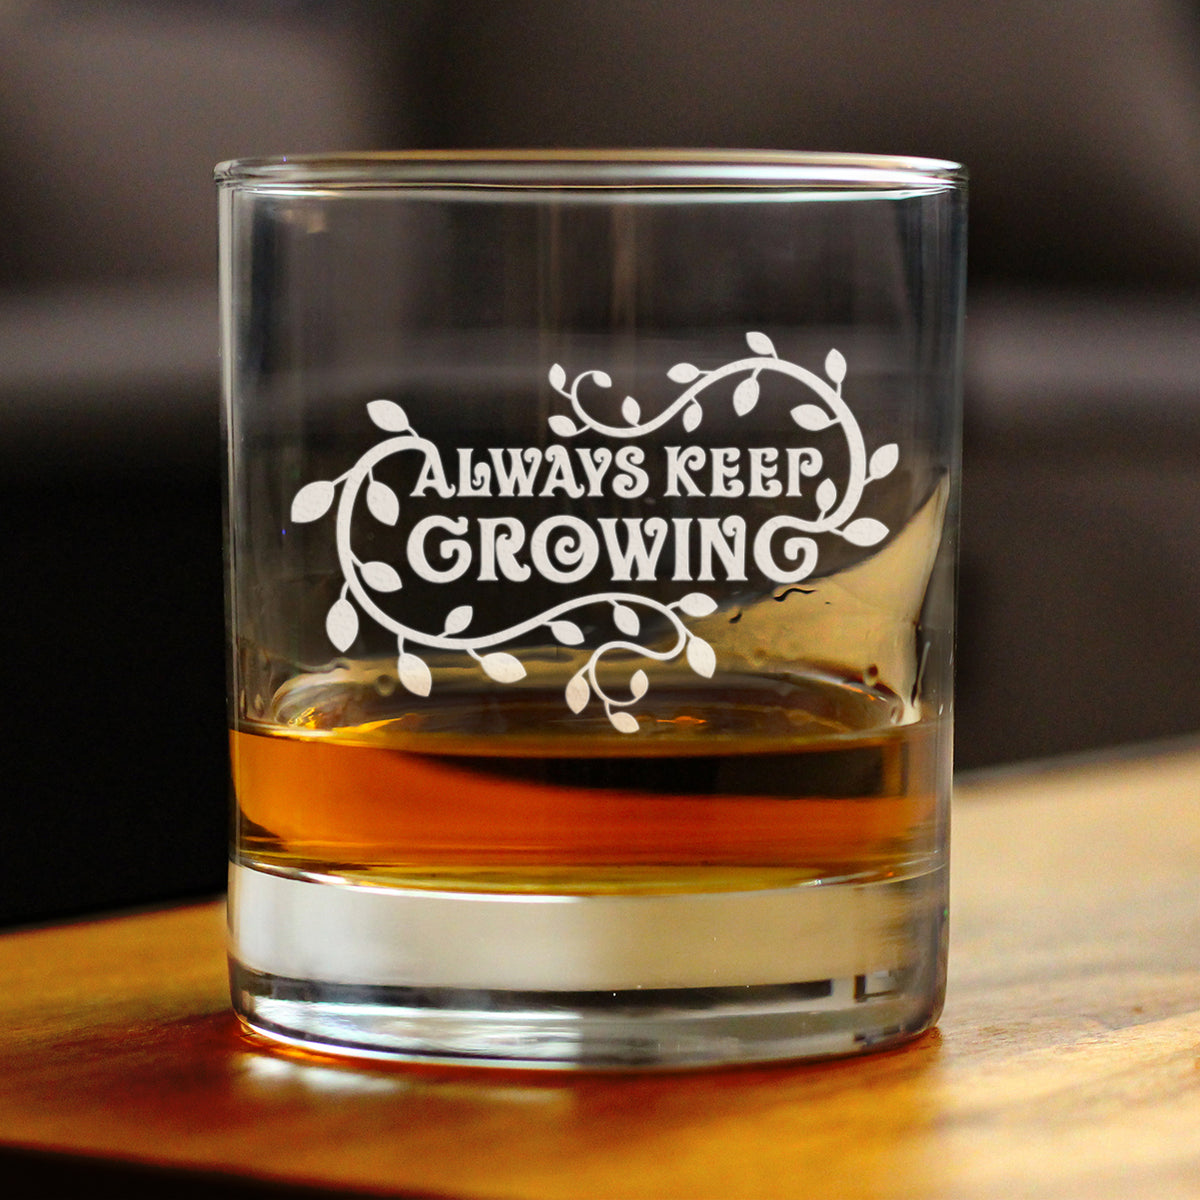 Keep Growing - Whiskey Rocks Glass - Gardening Themed Gifts and Decor for Gardeners - 10.25 Oz Glass